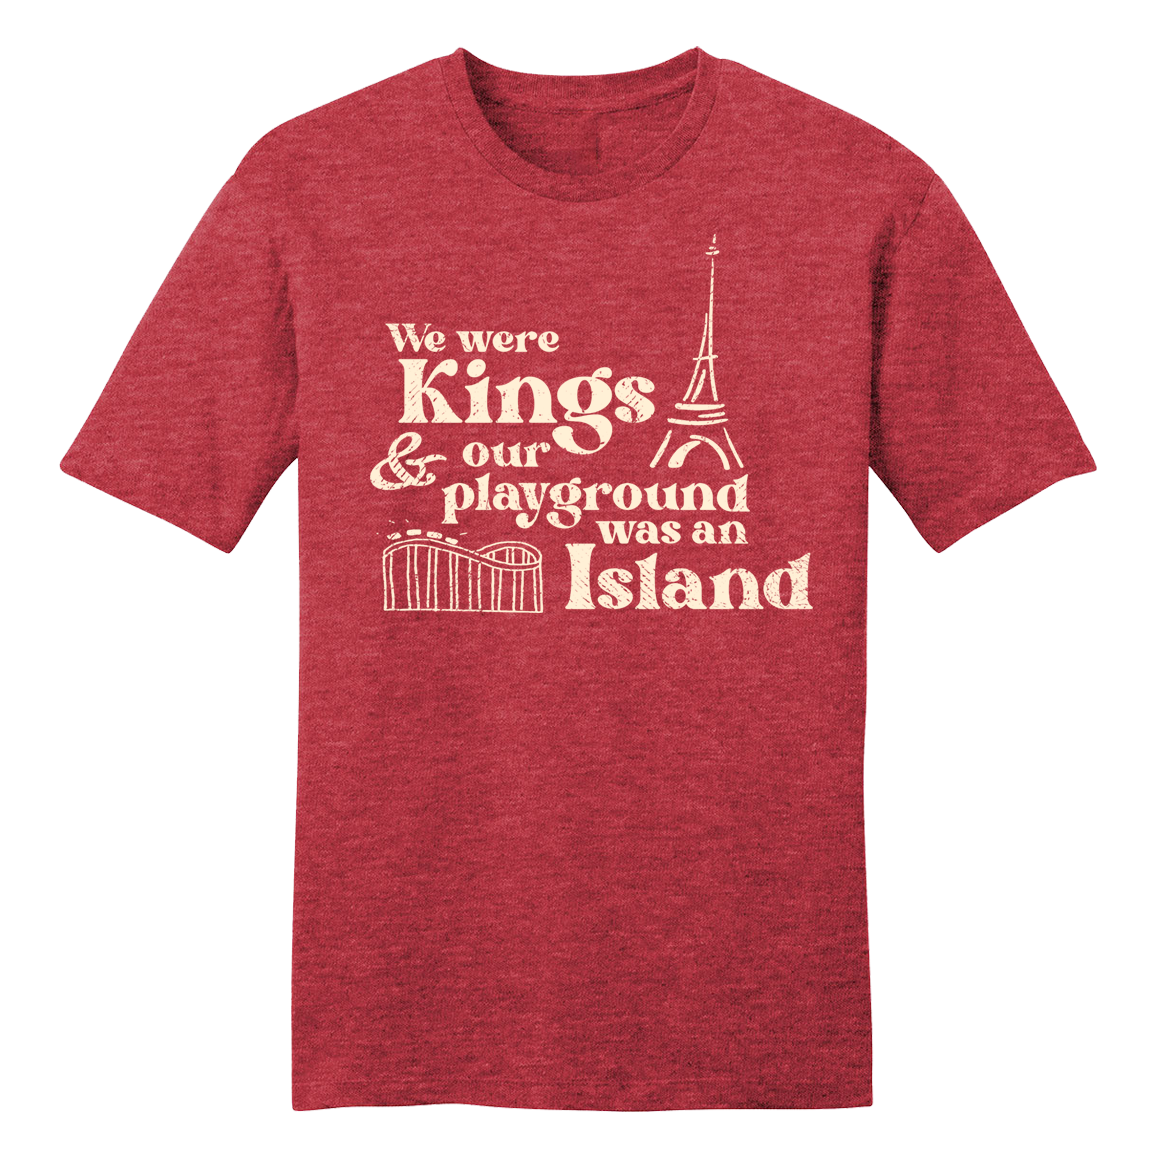 We Were Kings and Our Playground Was an Island - Cincy Shirts